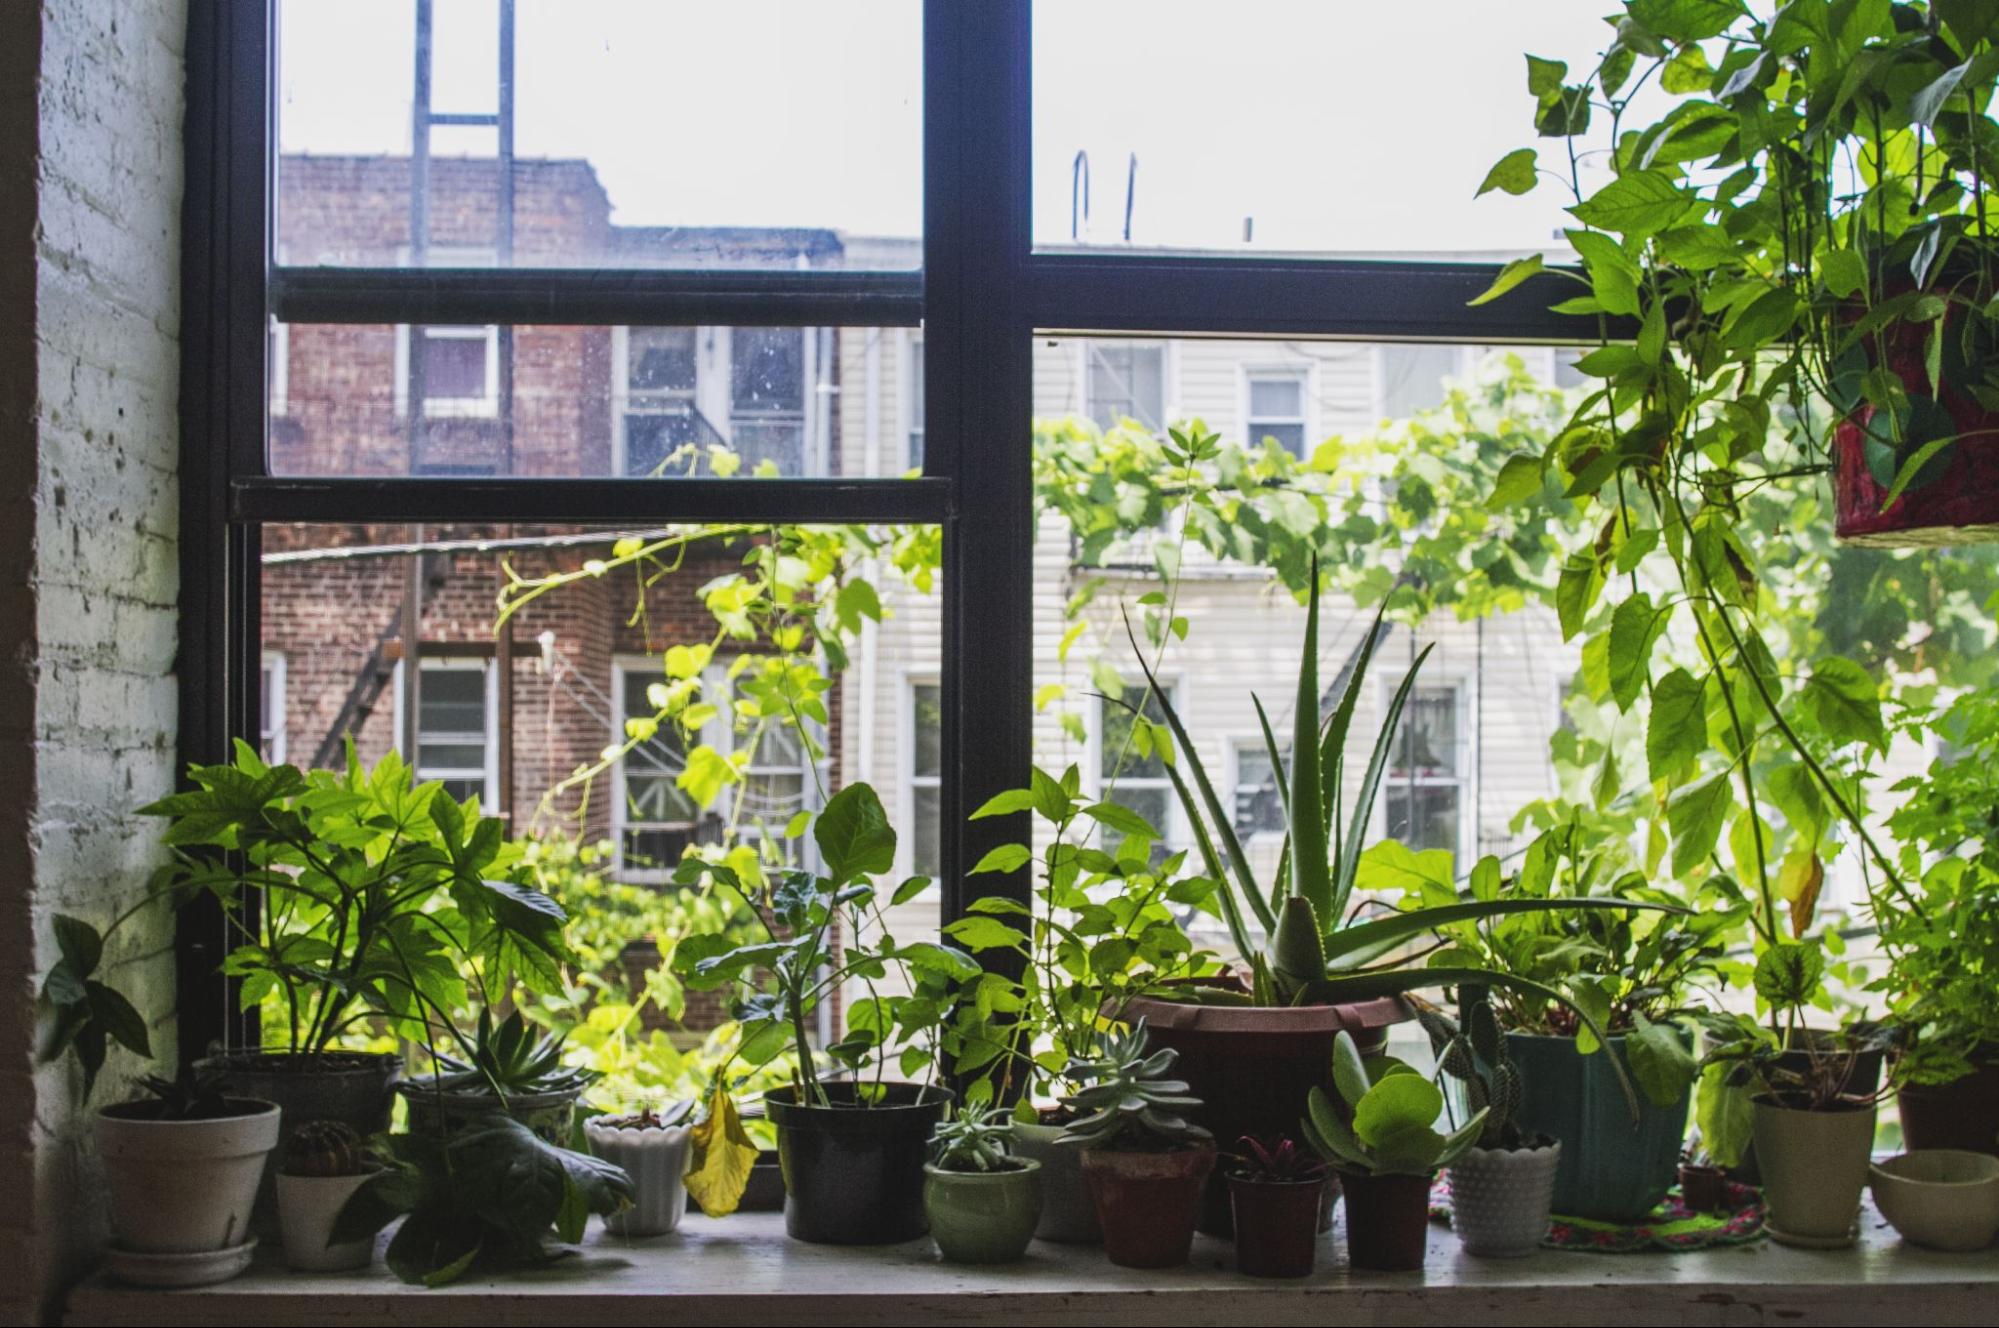 Plants in front of a window getting bright light.